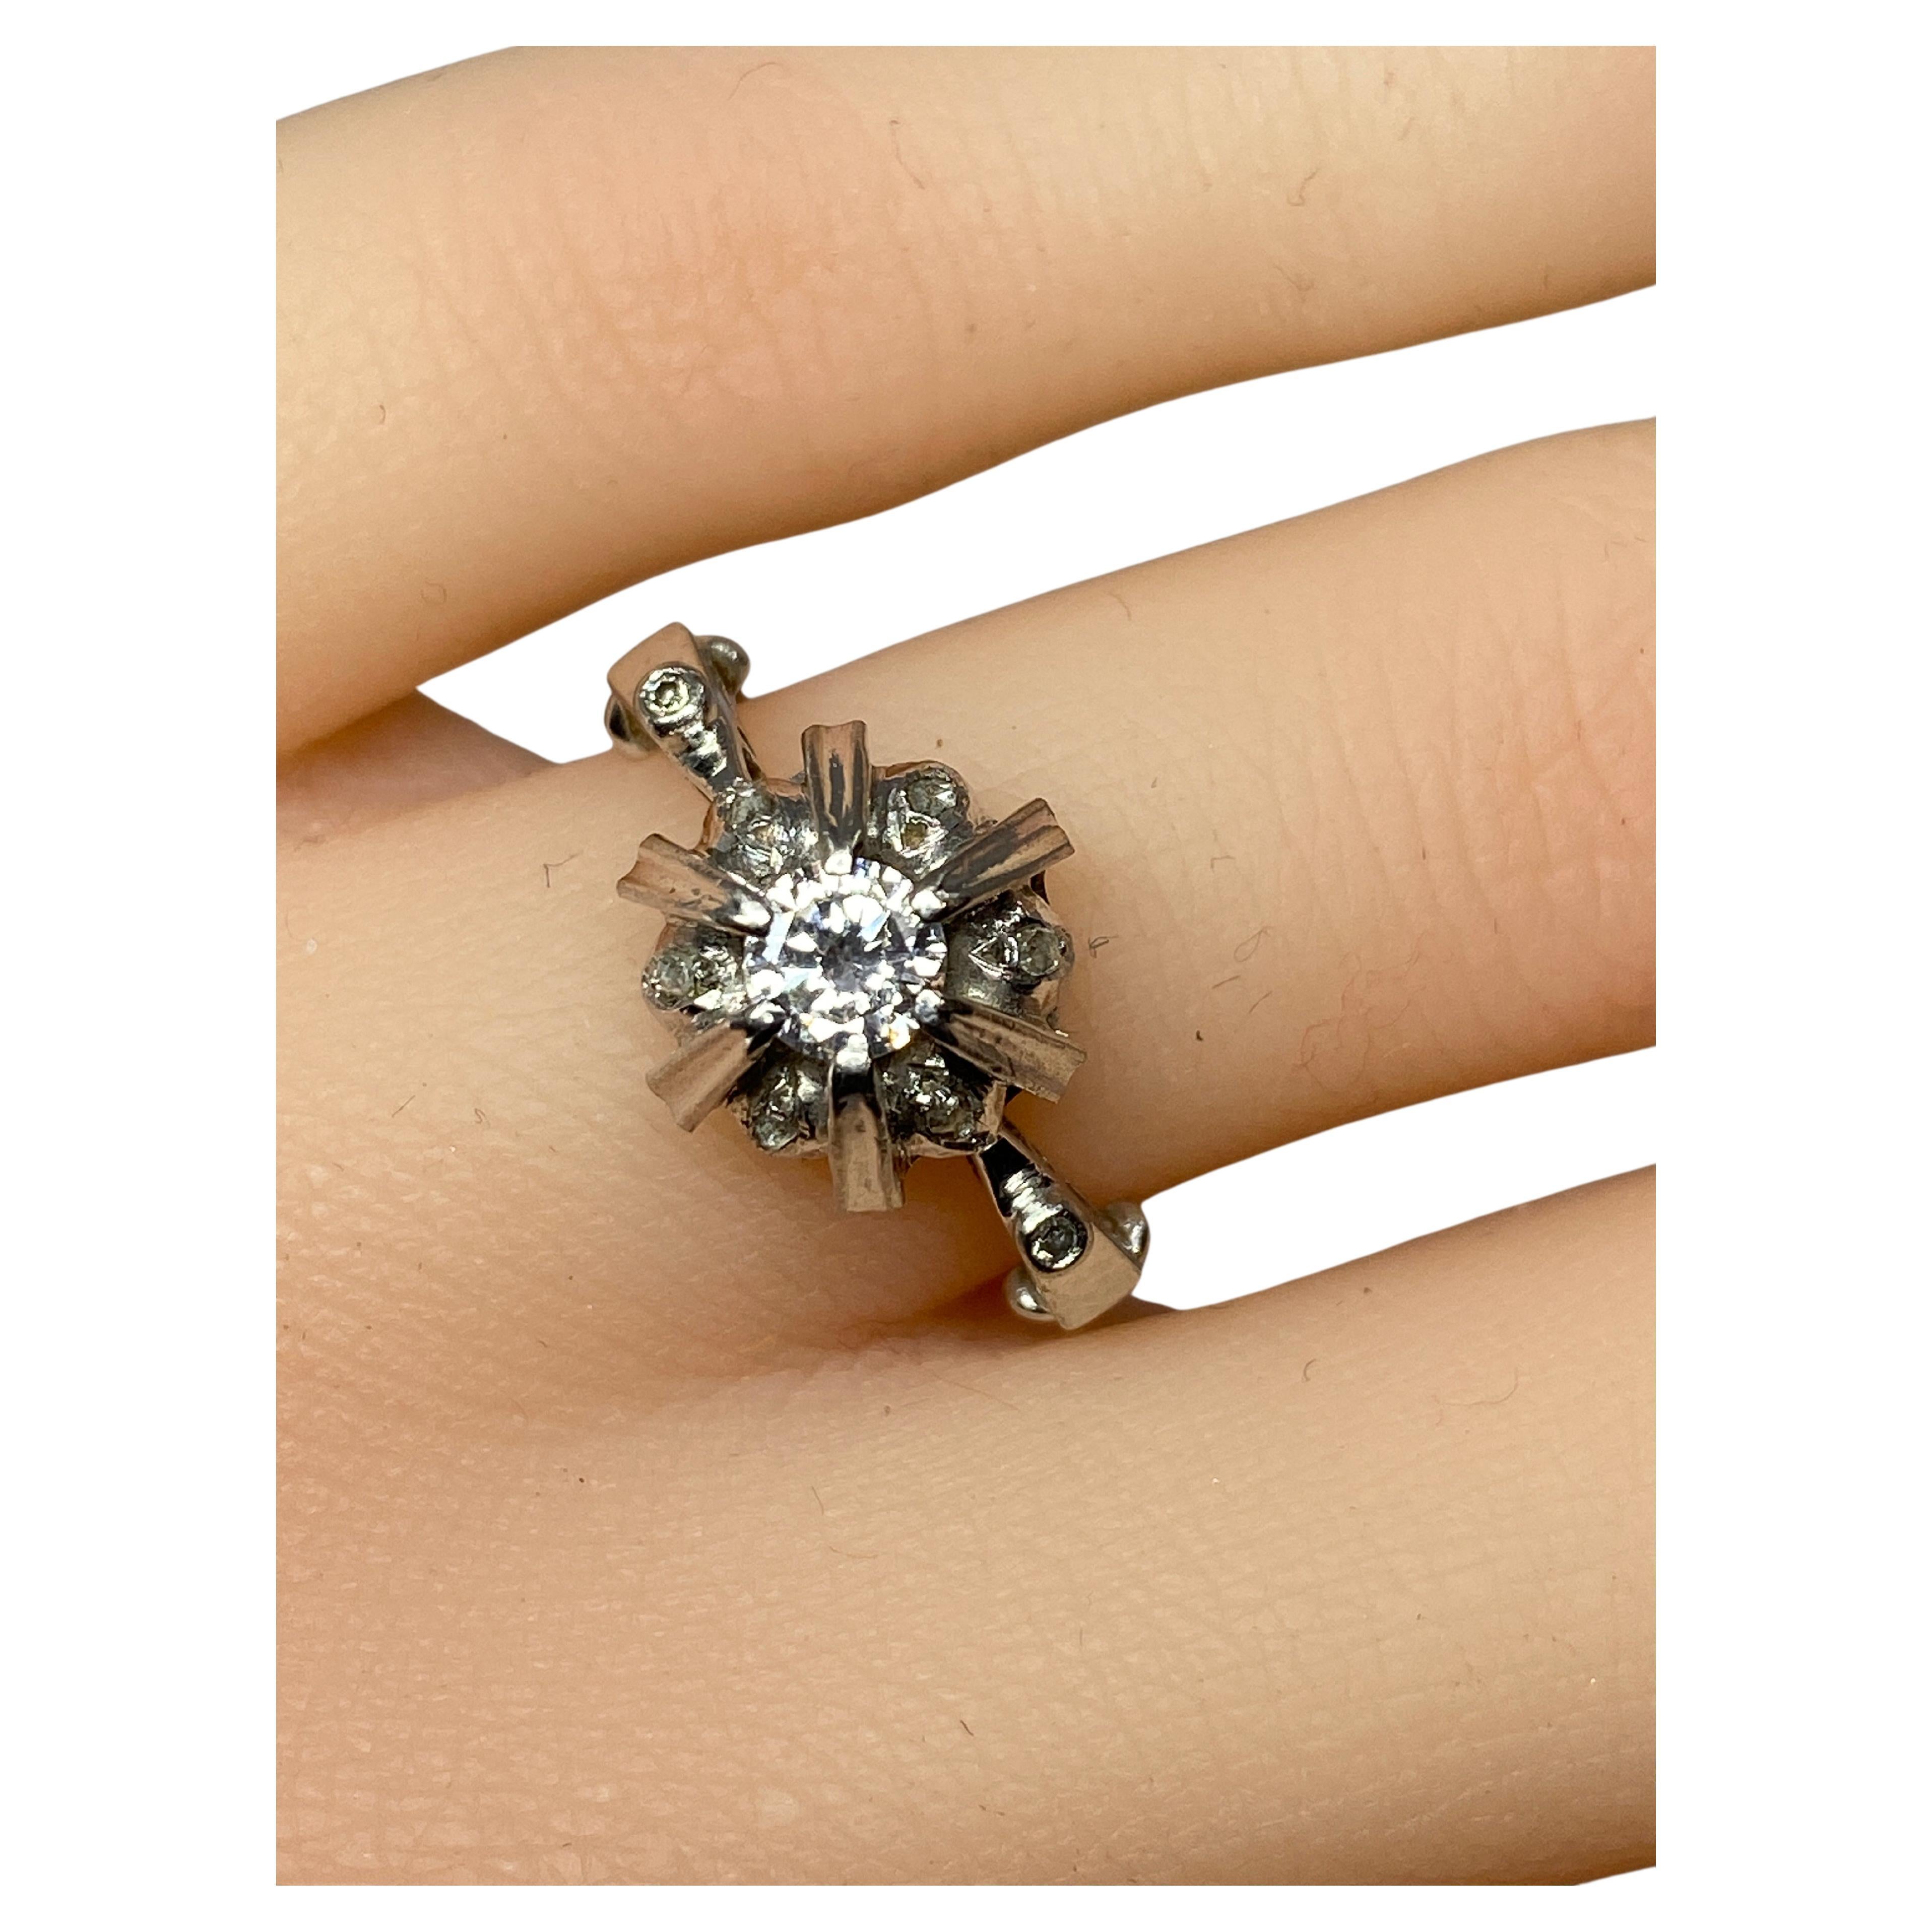 18 Carat White Gold Solitaire Style Ring Set with Diamonds , 1900 Style